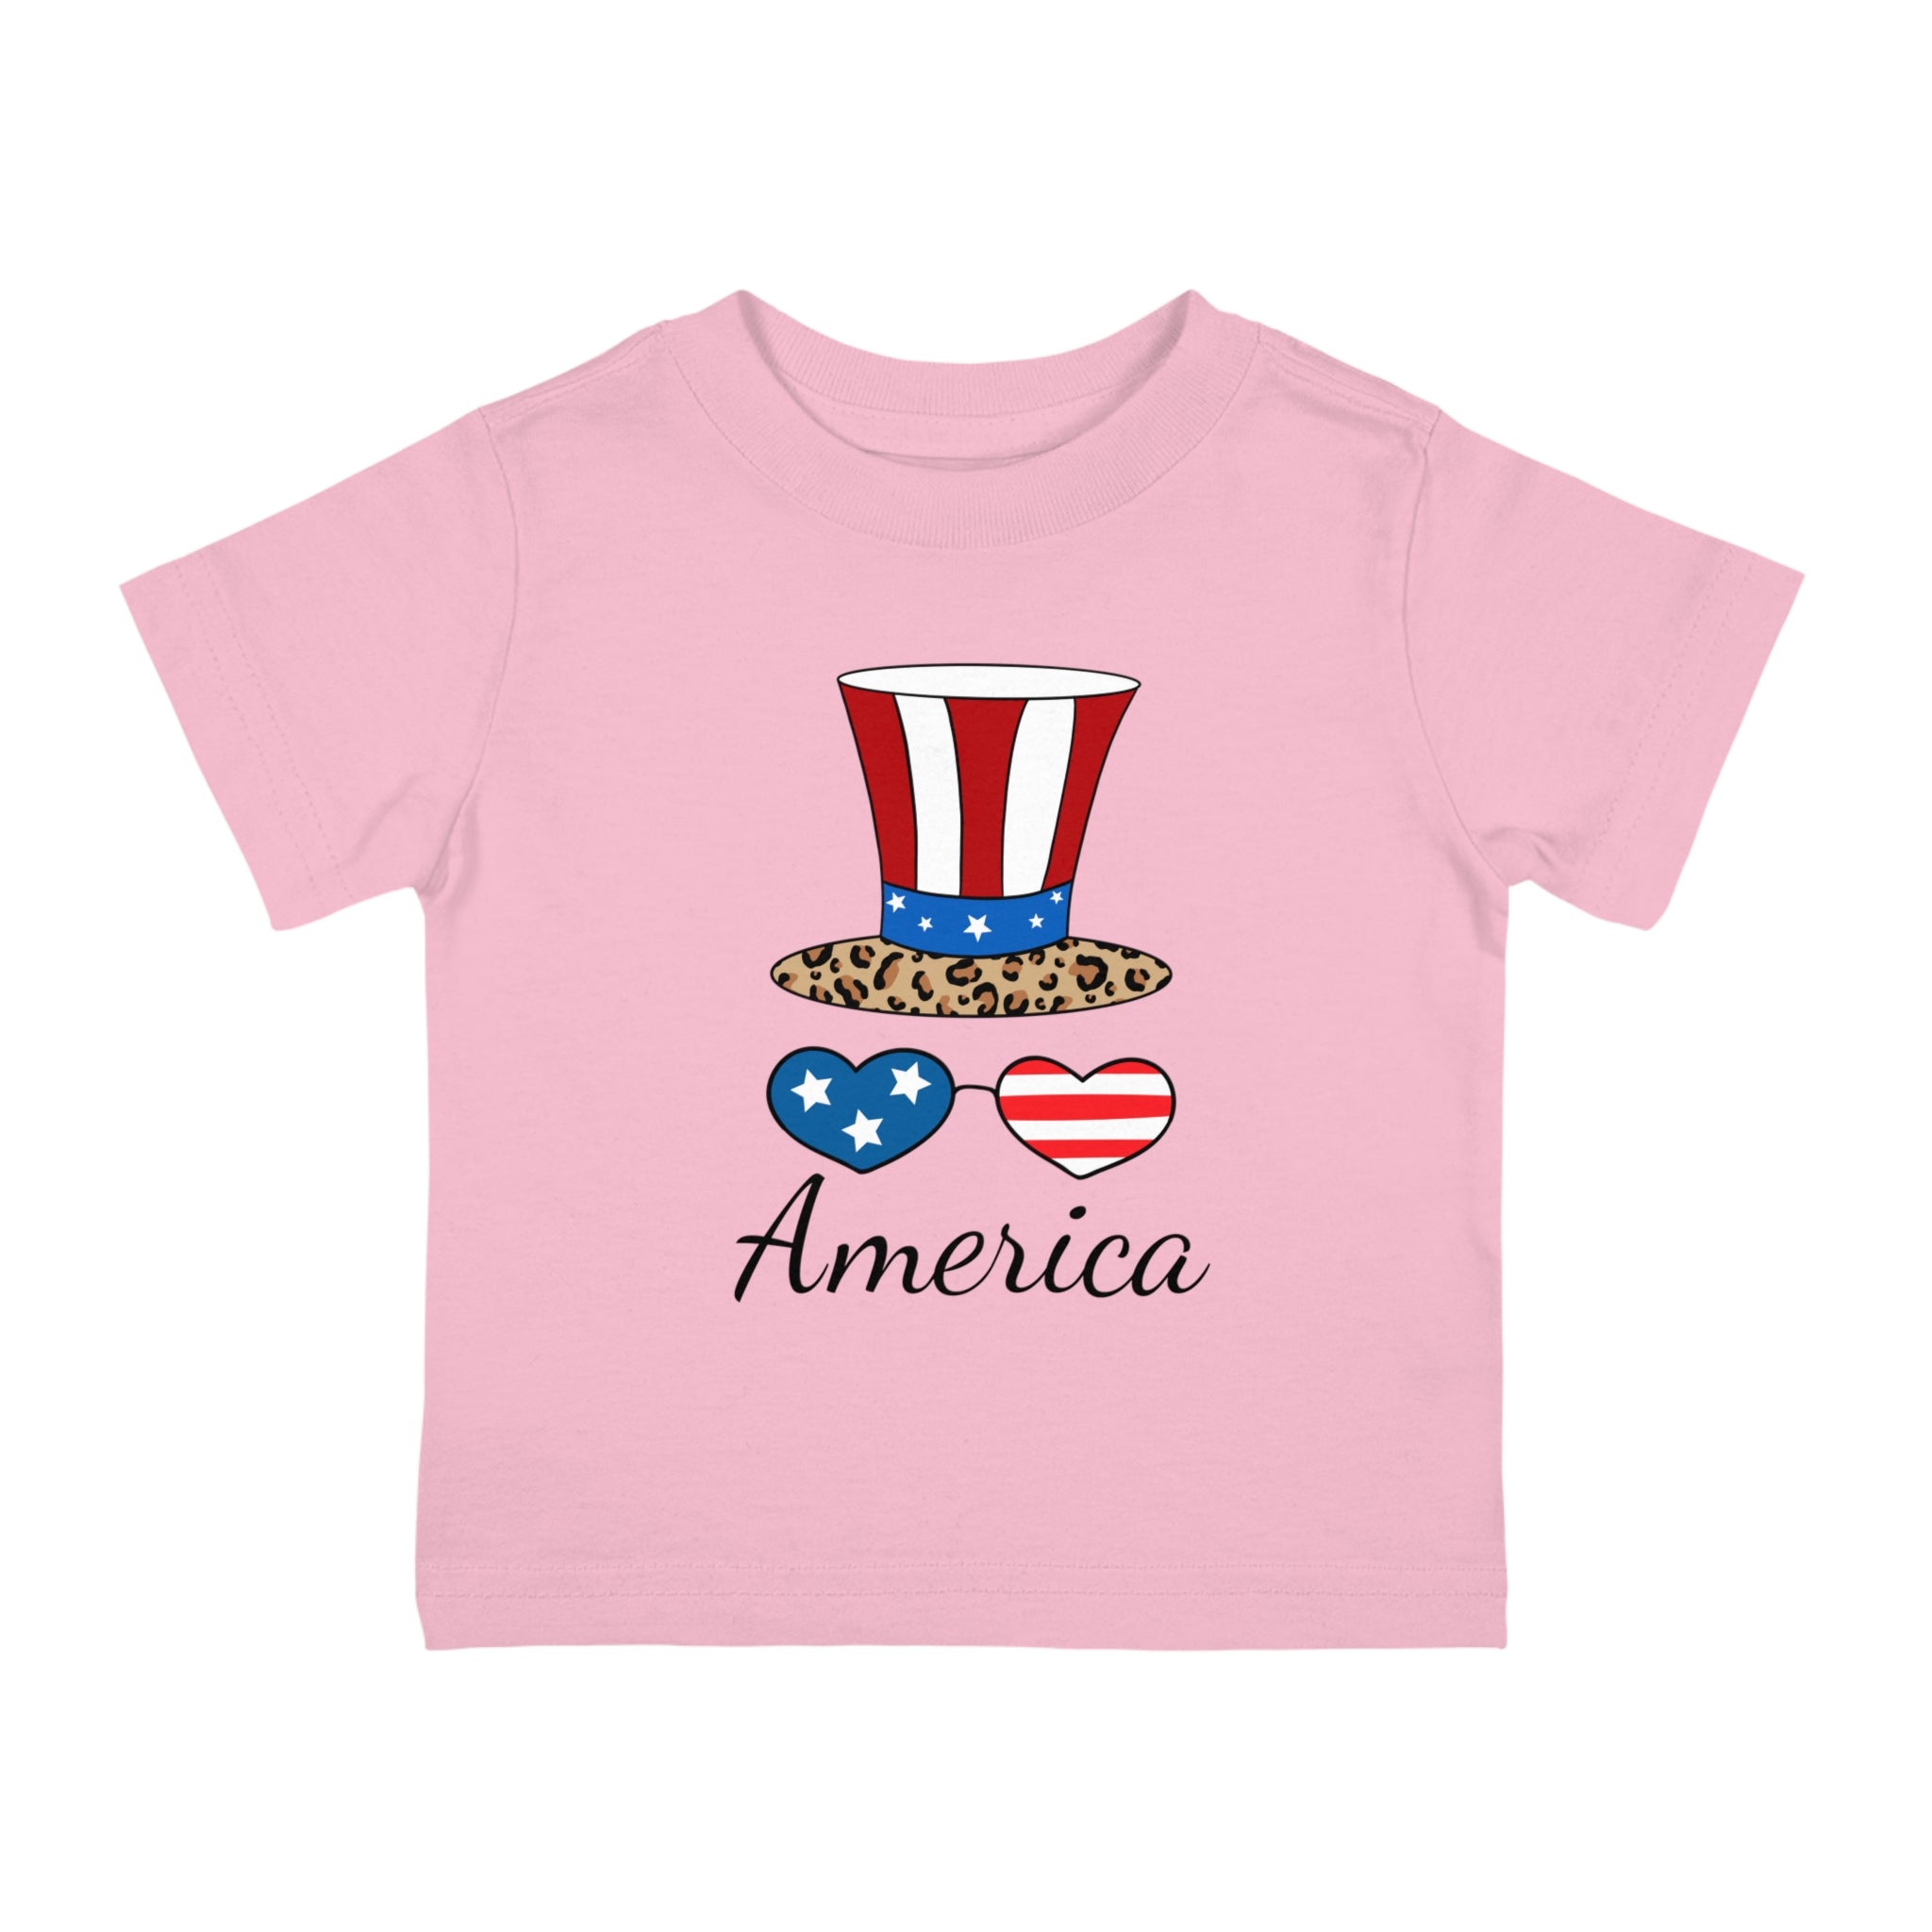 Happy 4th of July Design Infant Shirt, Baby Tee, Infant Tee